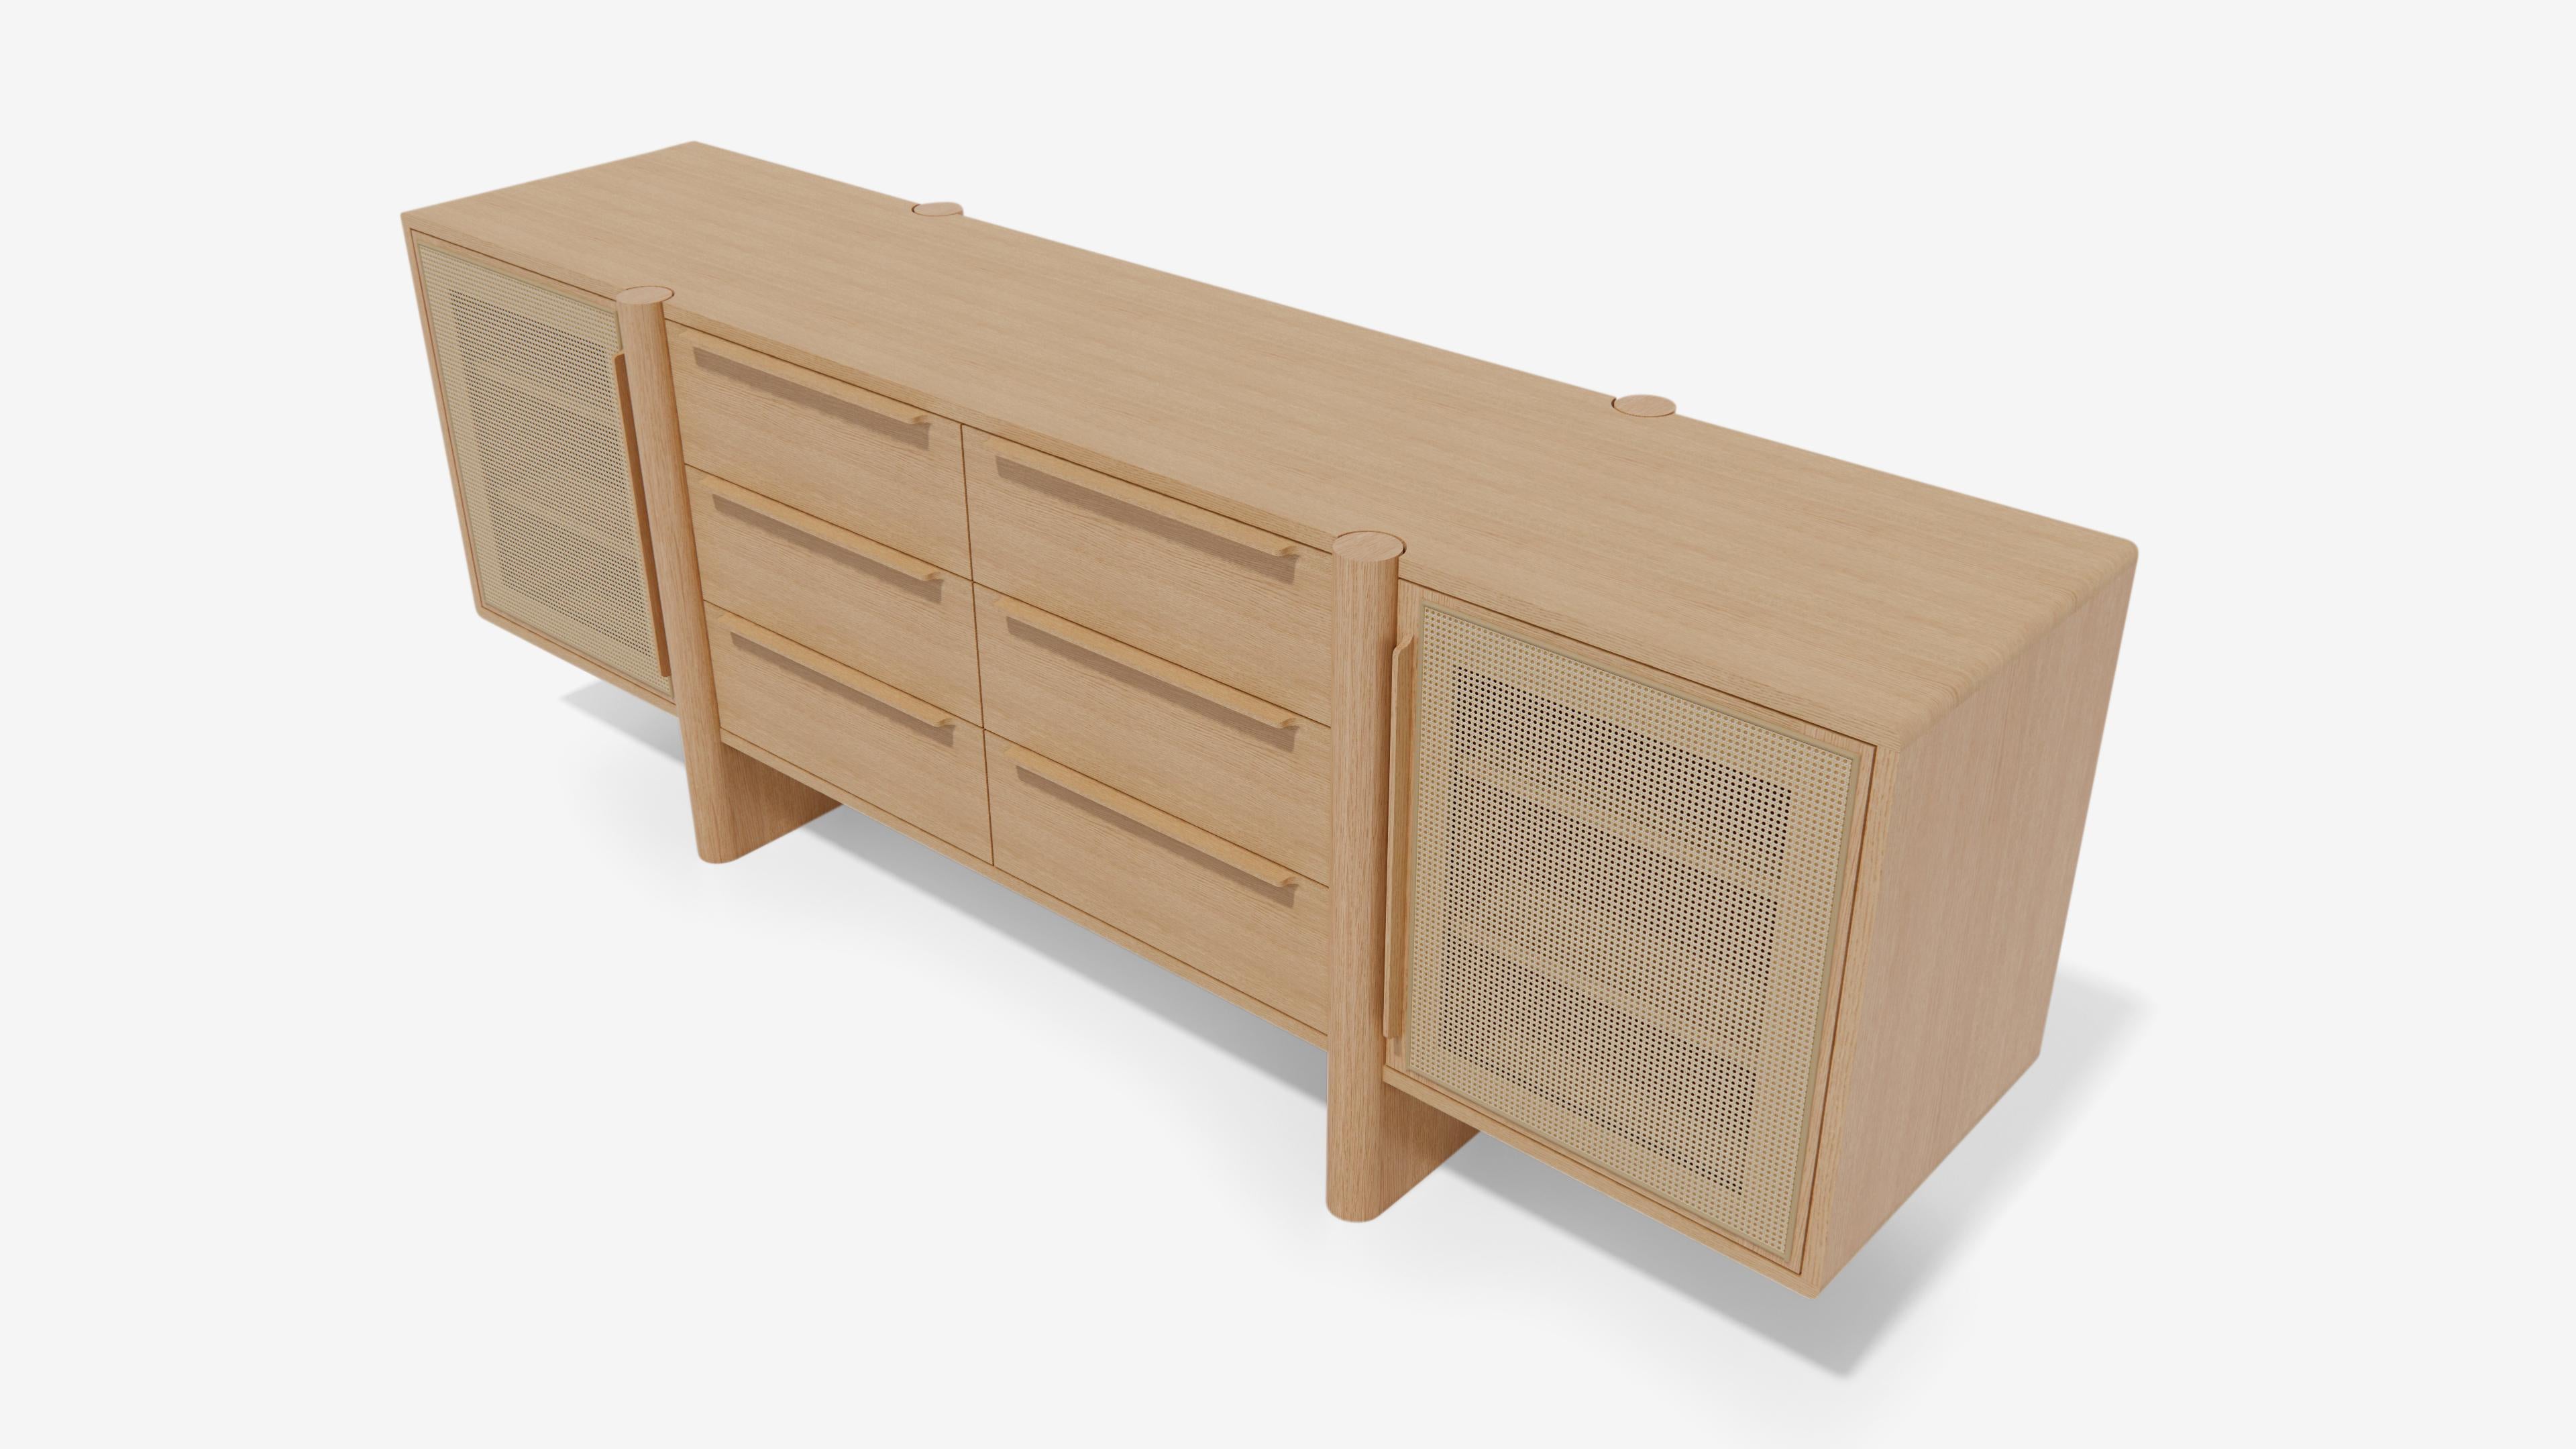 The Sulaco Sideboard features an elevated blend of clean lines with its organic form all while providing a tailored look that still manages a broad range of user versatility. 

The textured addition of the caned panel doors provides a Classic